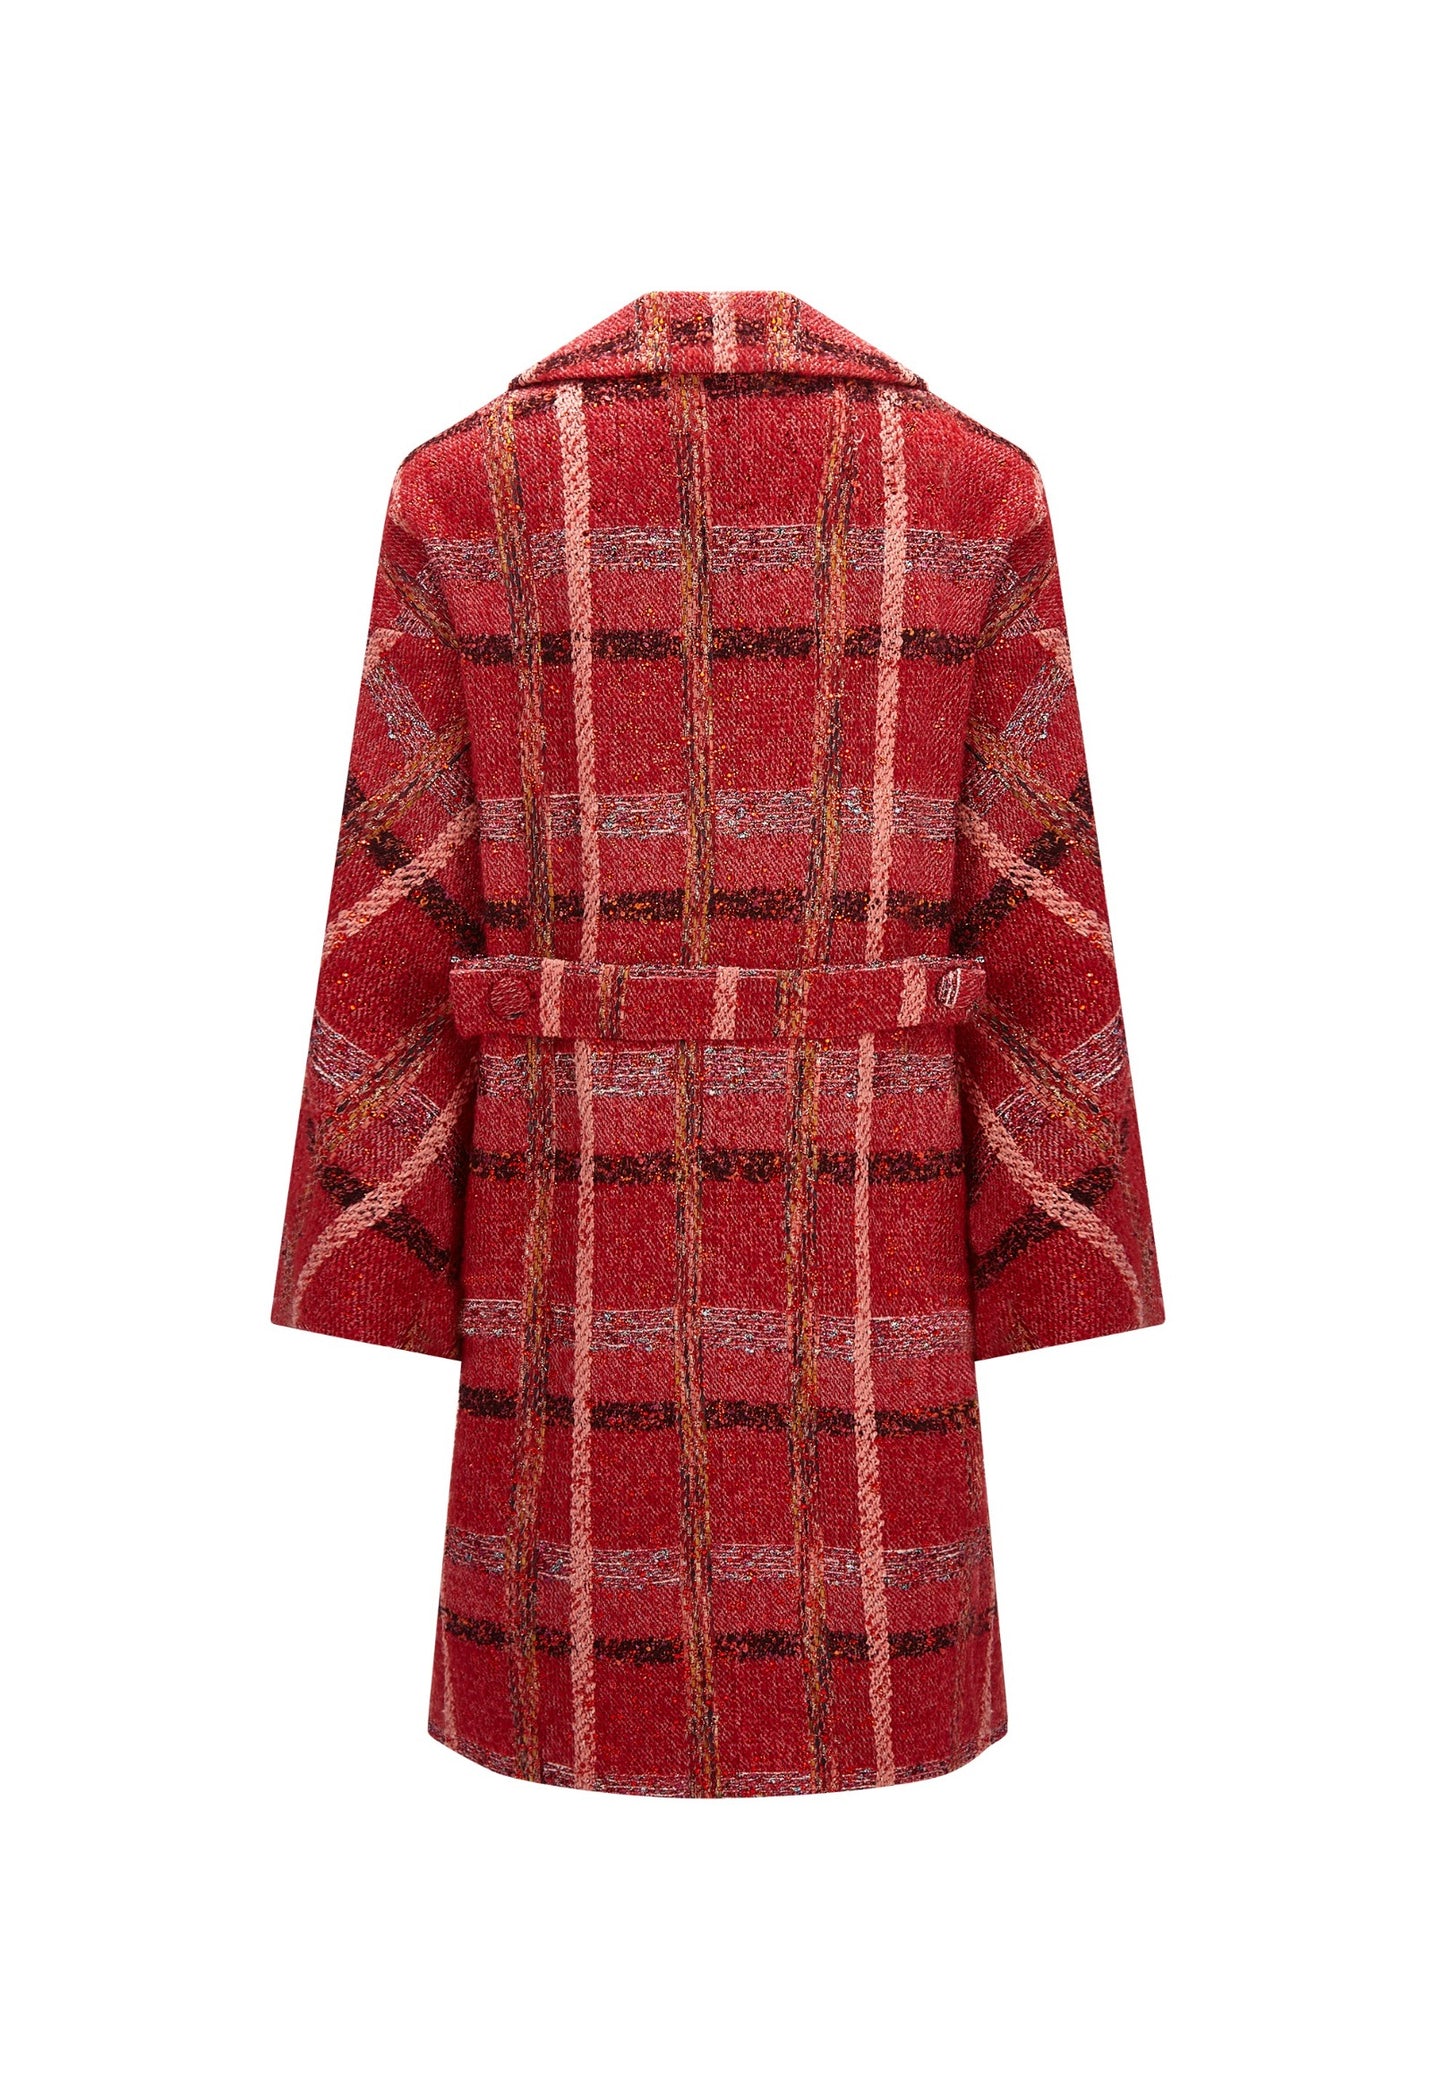 'RED BOUCLE HEAVY STARDUST' L/S PATCH POCKET COAT W/ CRYSTALS -  - Libertine